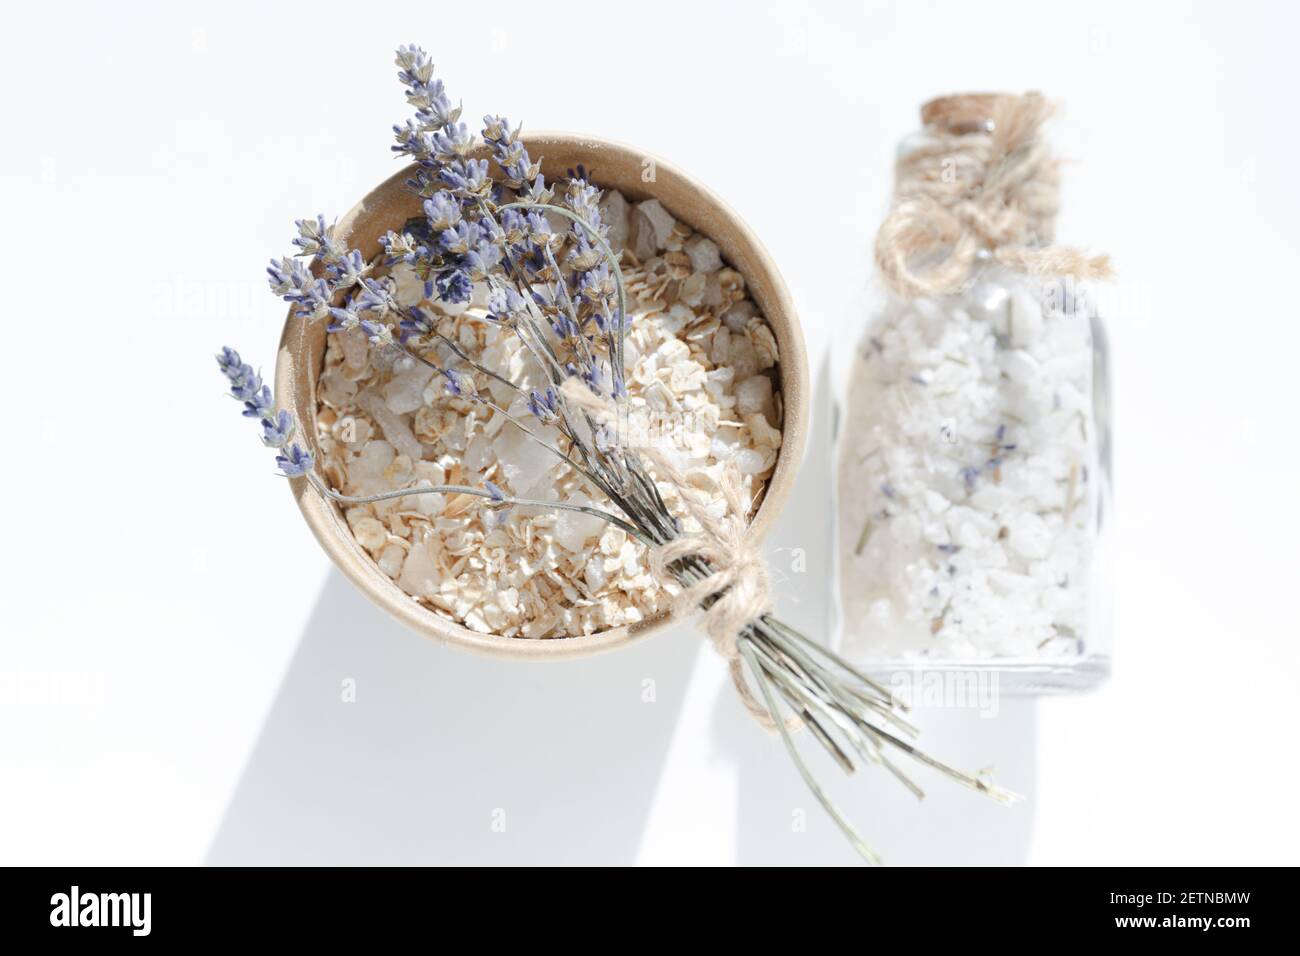 Cardboard jar with oatmeal and sea salt and a small bouquet of lavender. Sea salt in glass jar with cork stopper. Spa products for skin cleansing Stock Photo